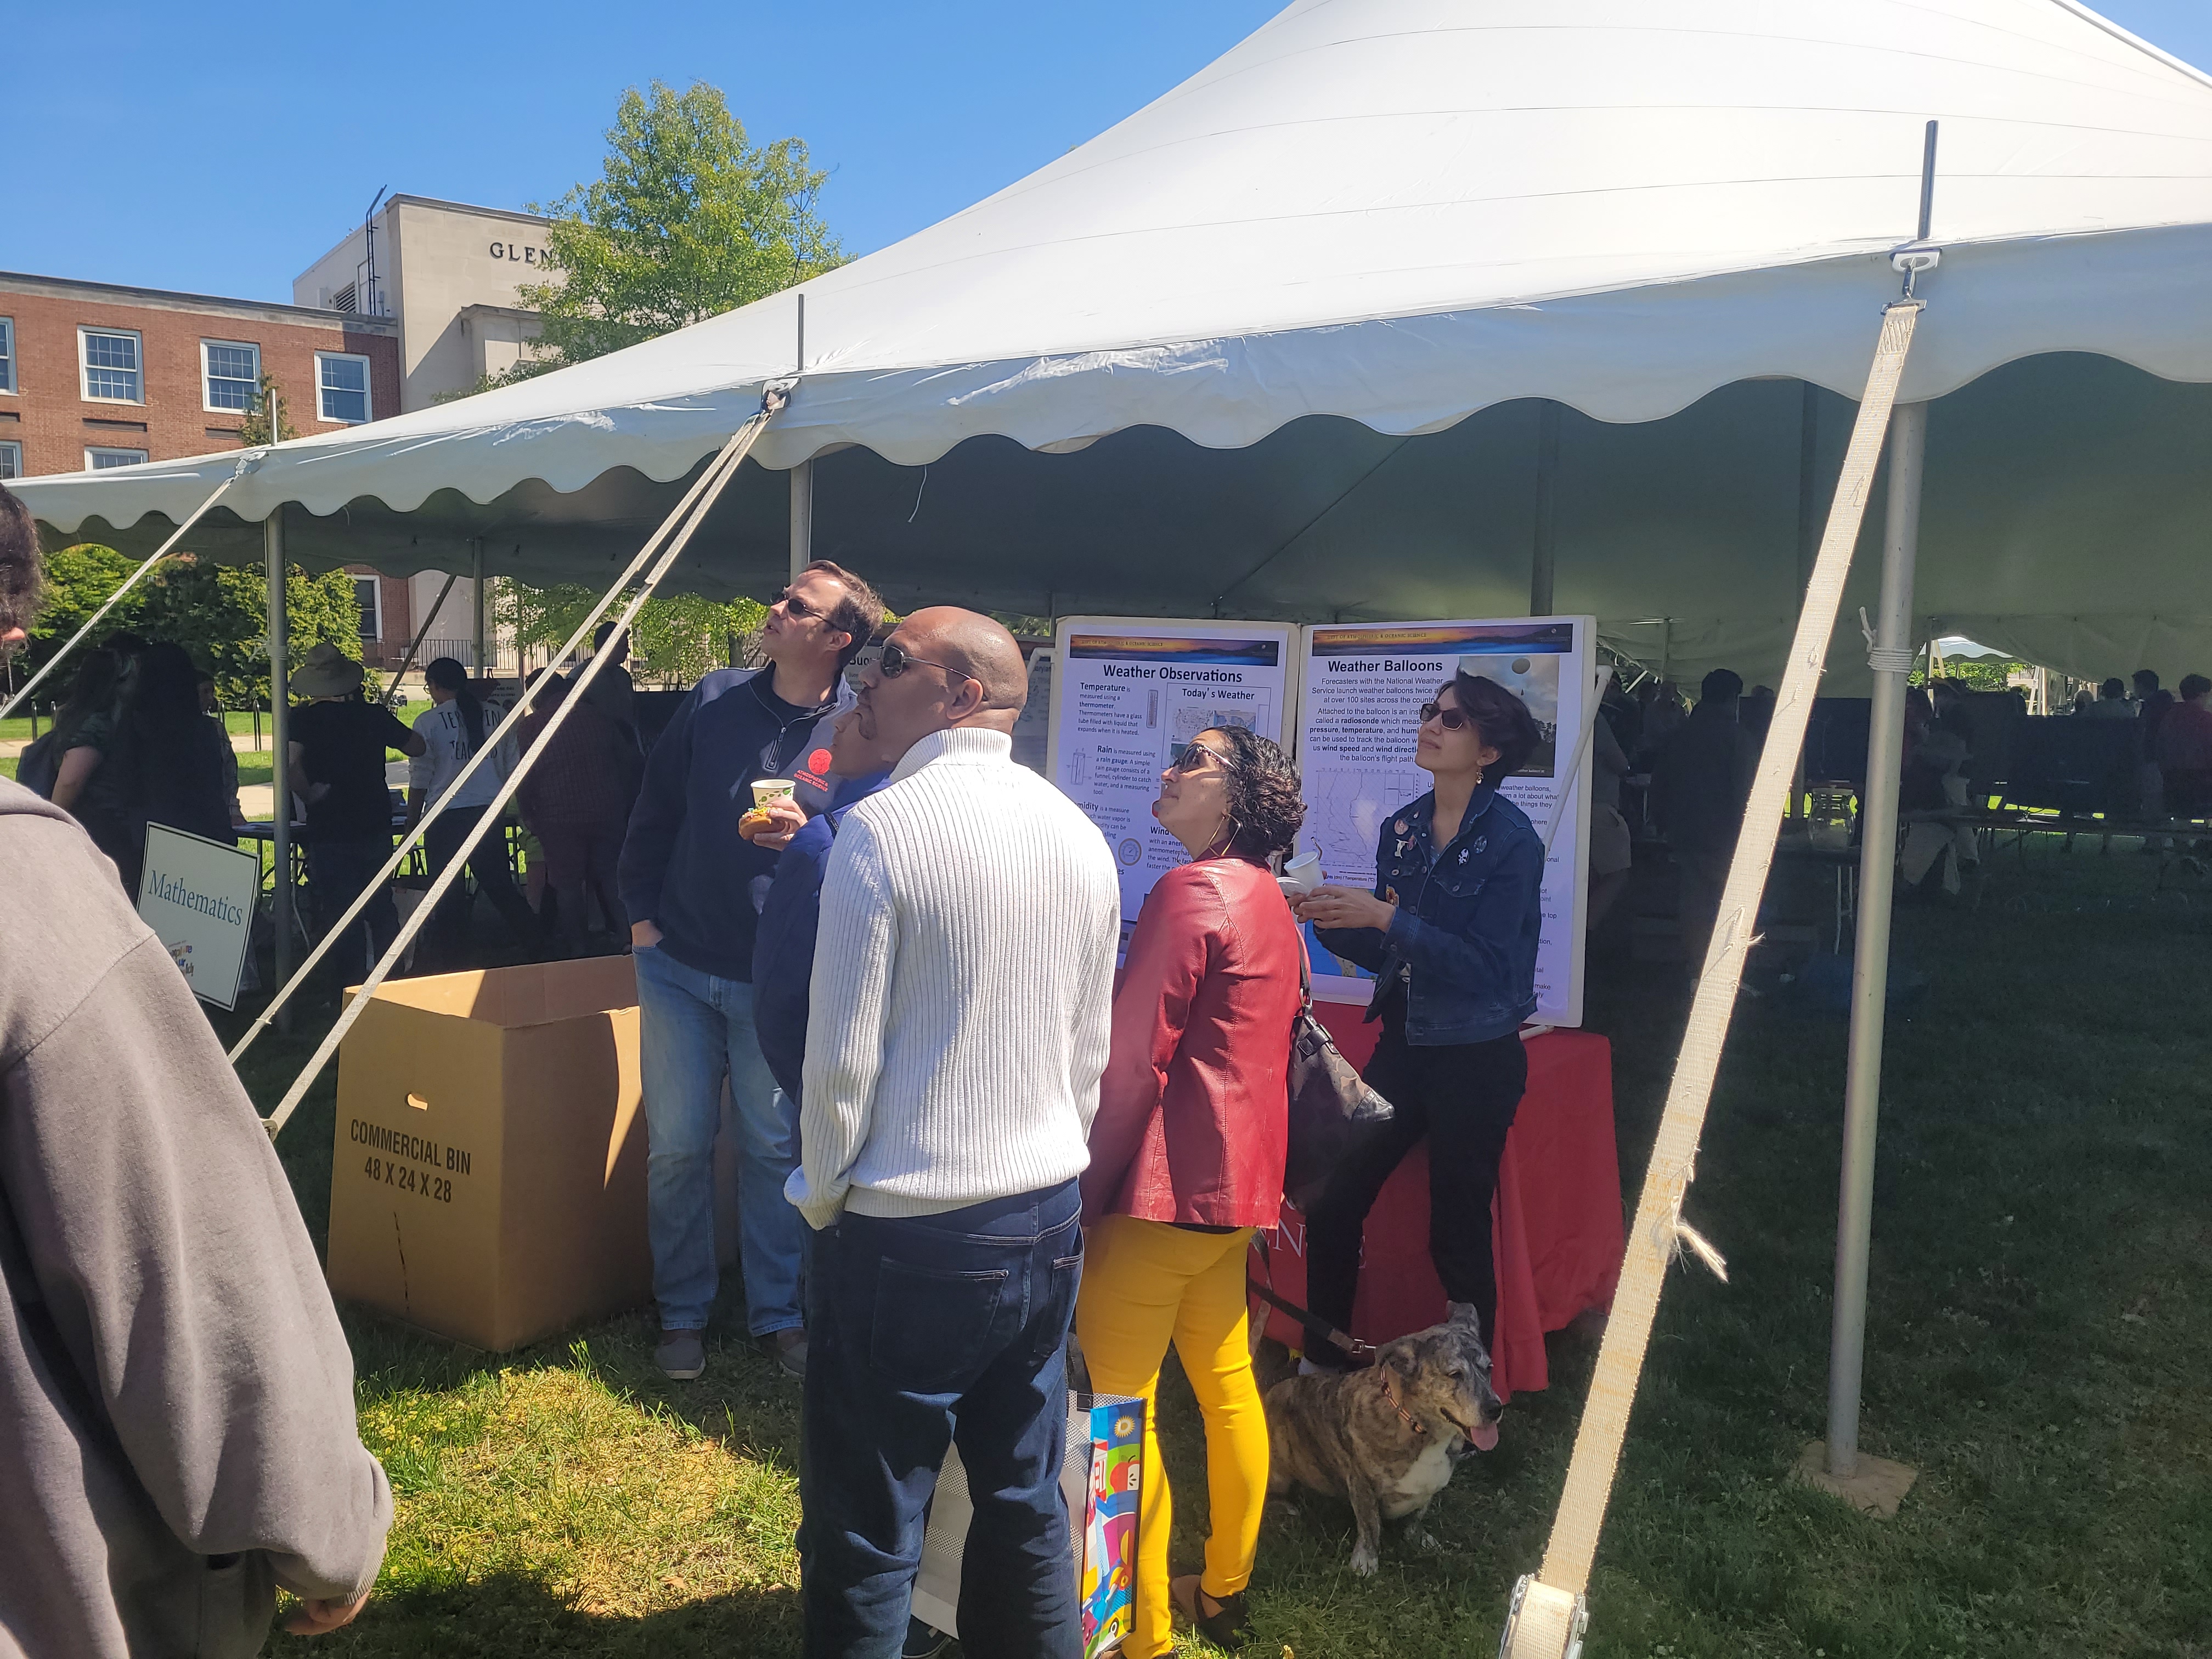 AOSC's Maryland Day tent with visitors standing around